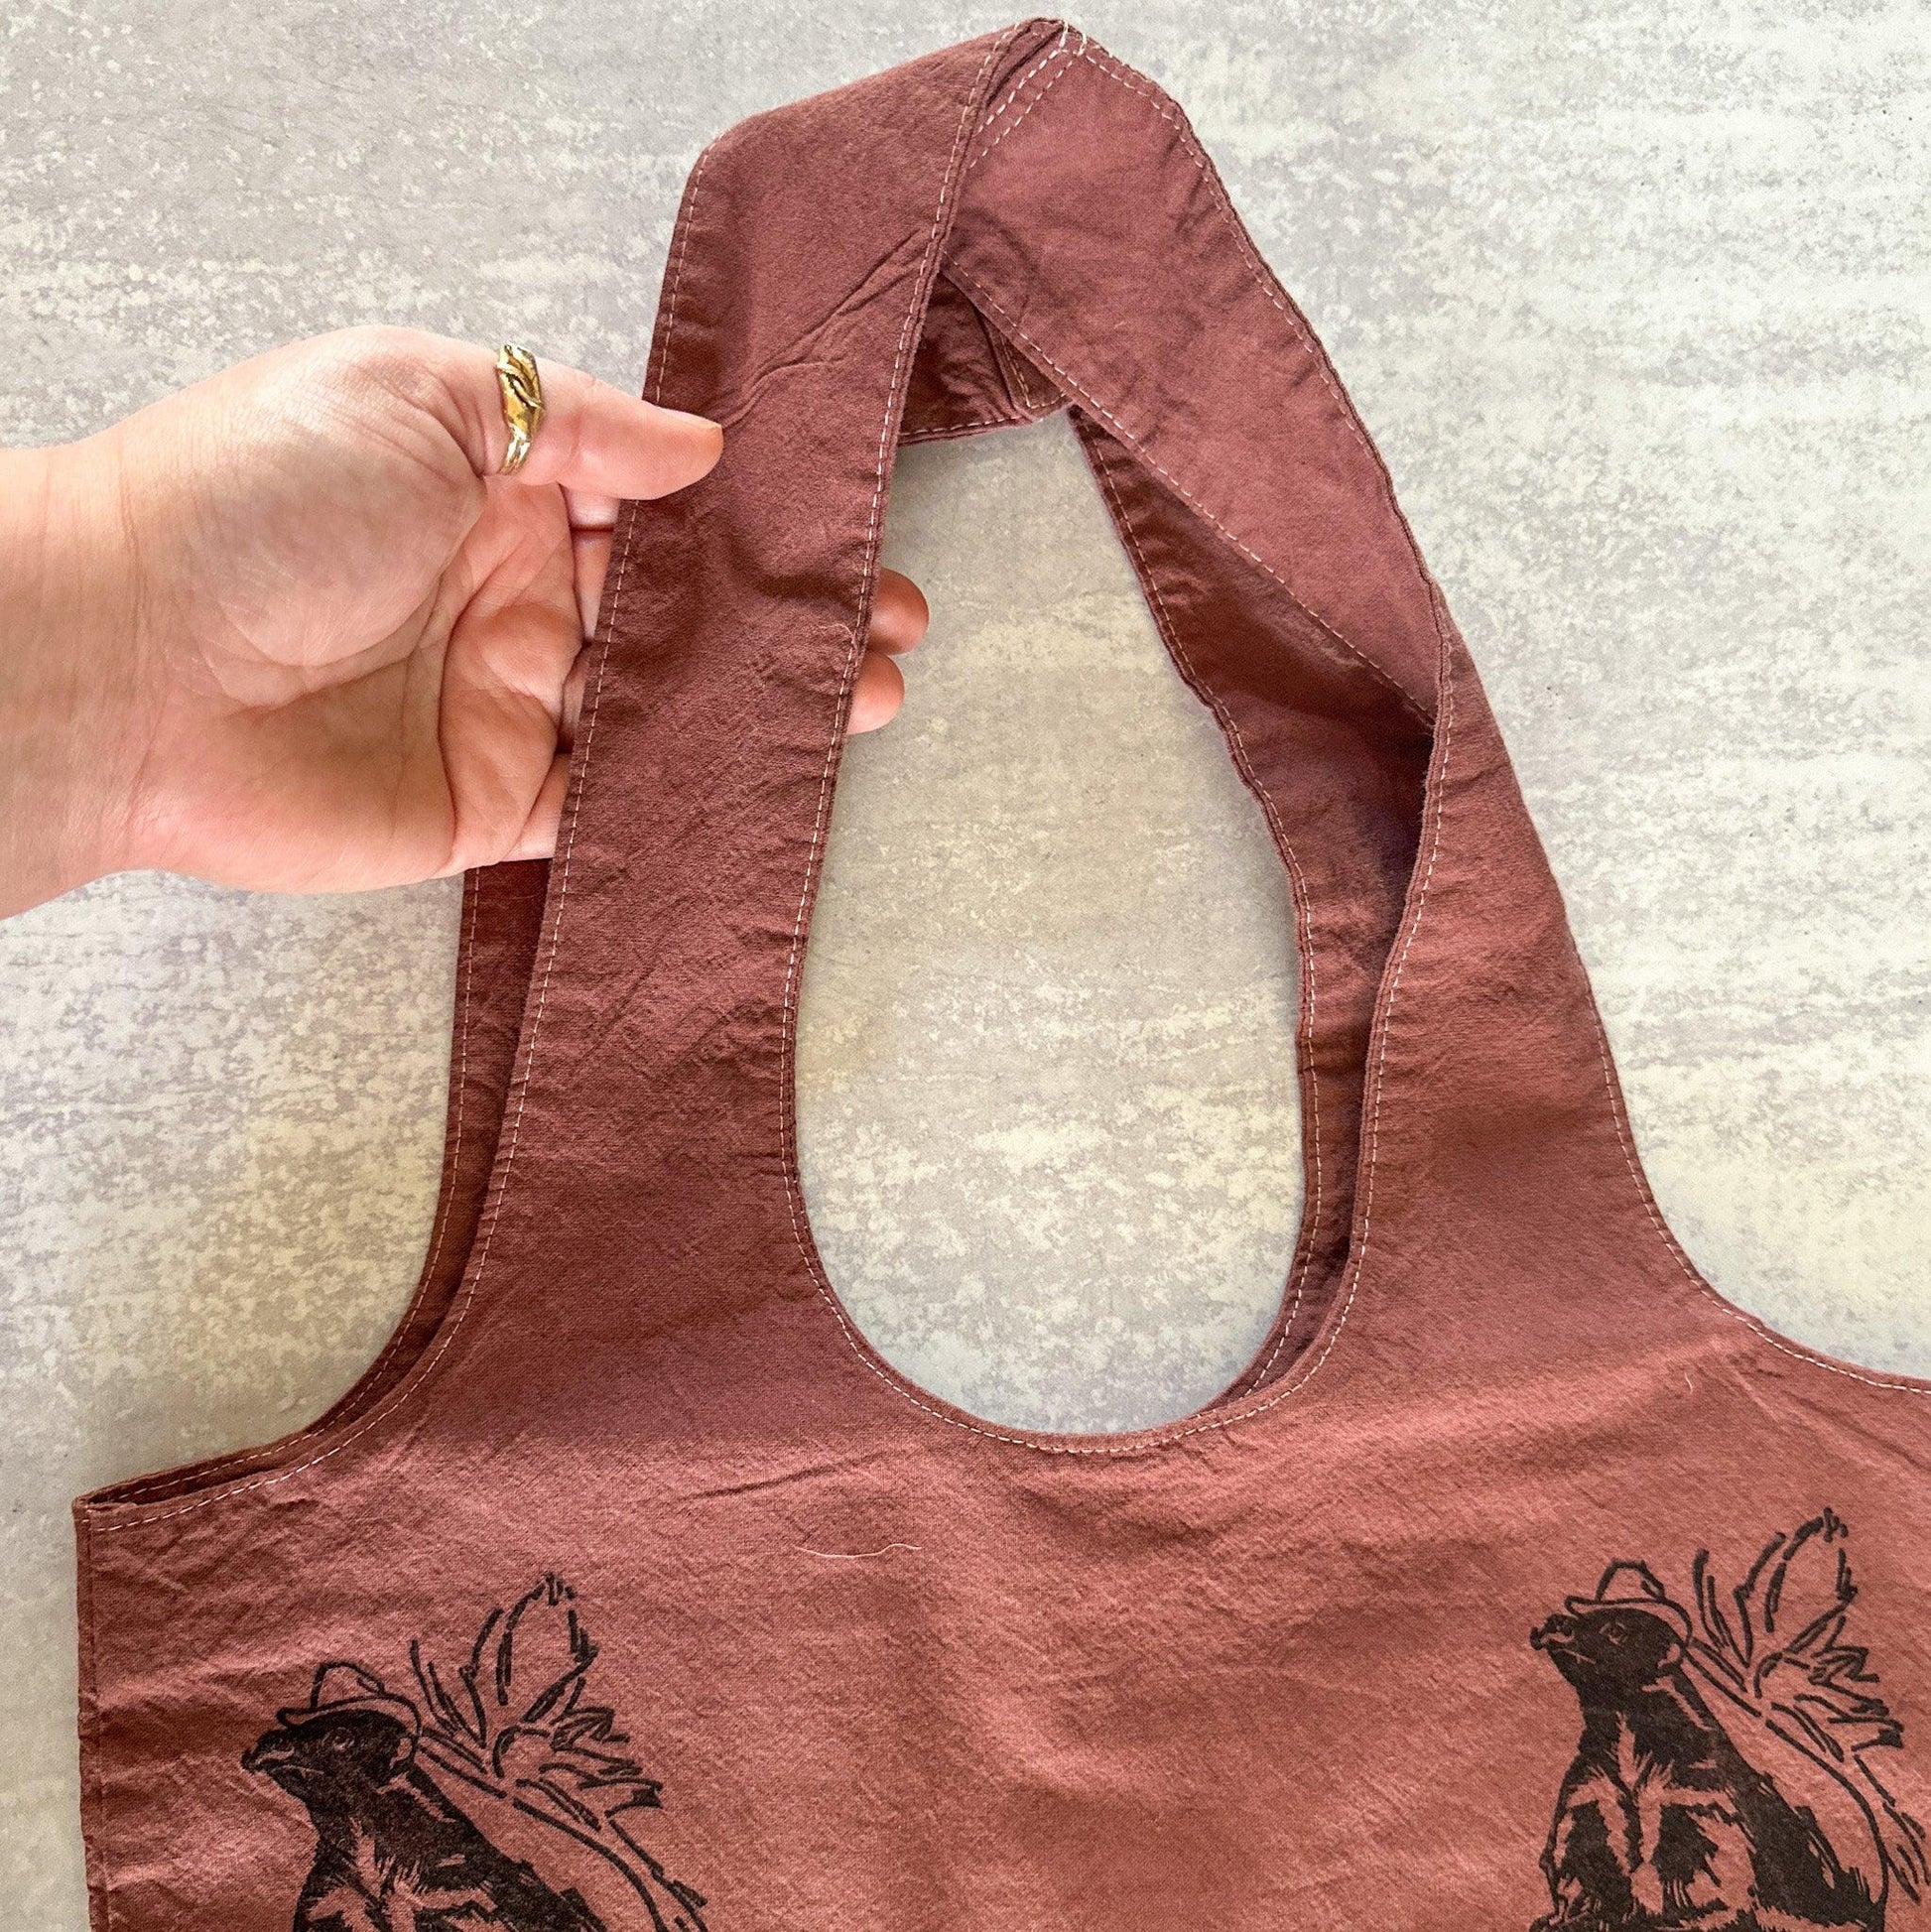 Red/Pink Tie-dye Periscoping Ball Python Tote Bag - The Serpentry